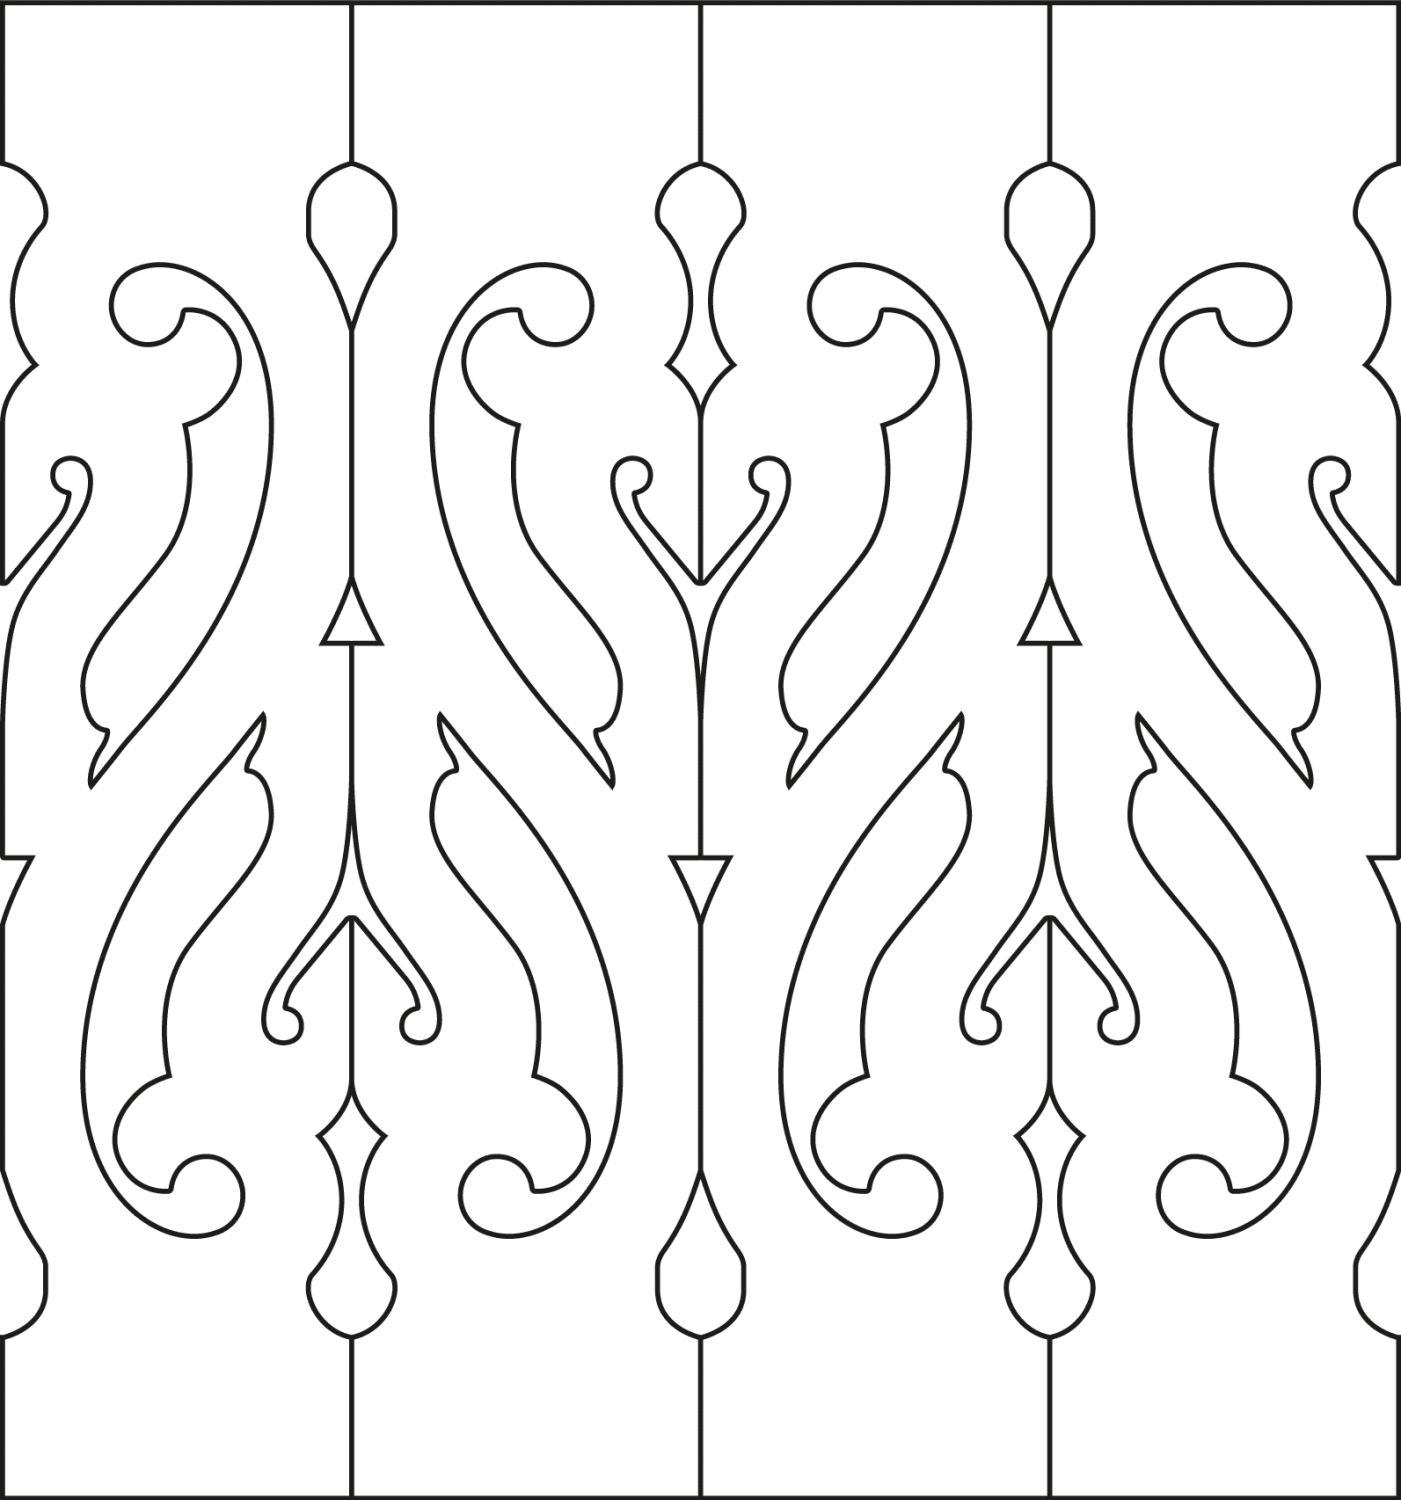 Baluster 012 - The drawing shows 4 Decorative victorian sawn balusters & pickets together